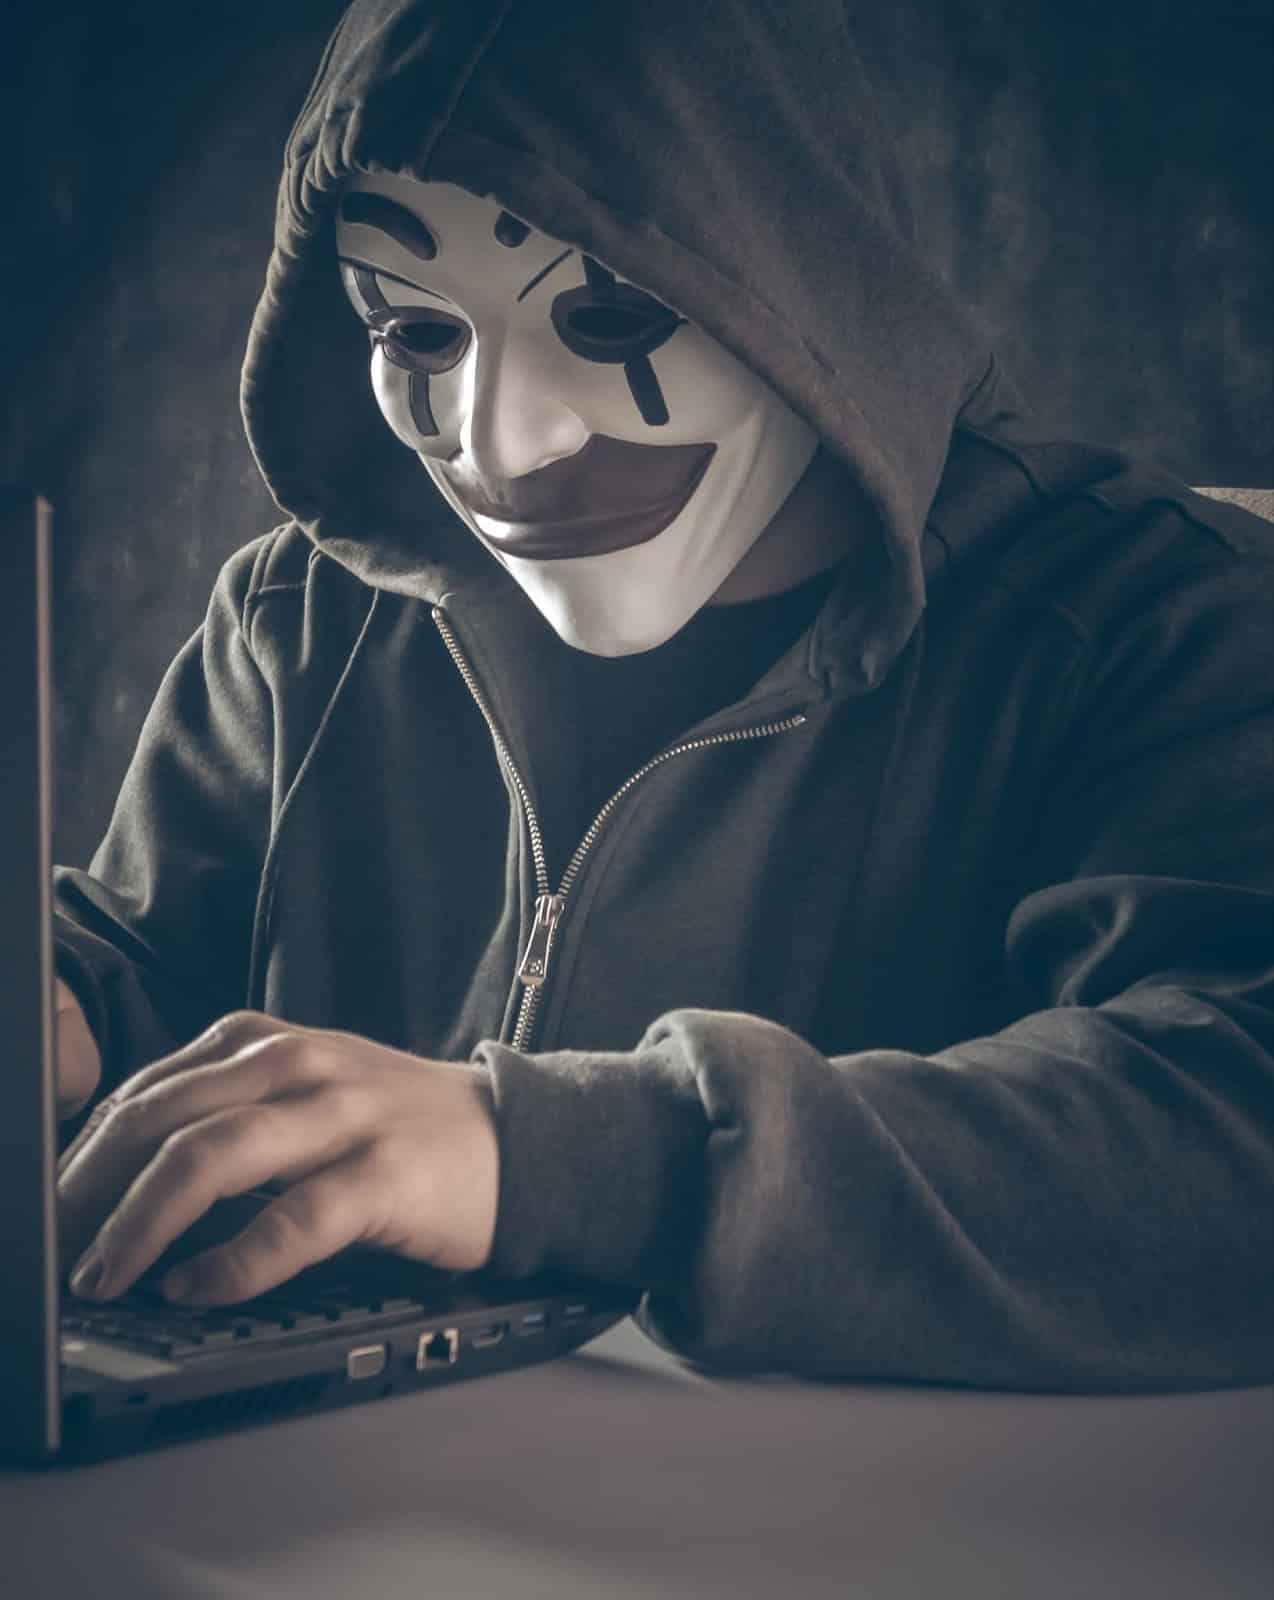 How To Stay Anonymous Online and Why It’s Important